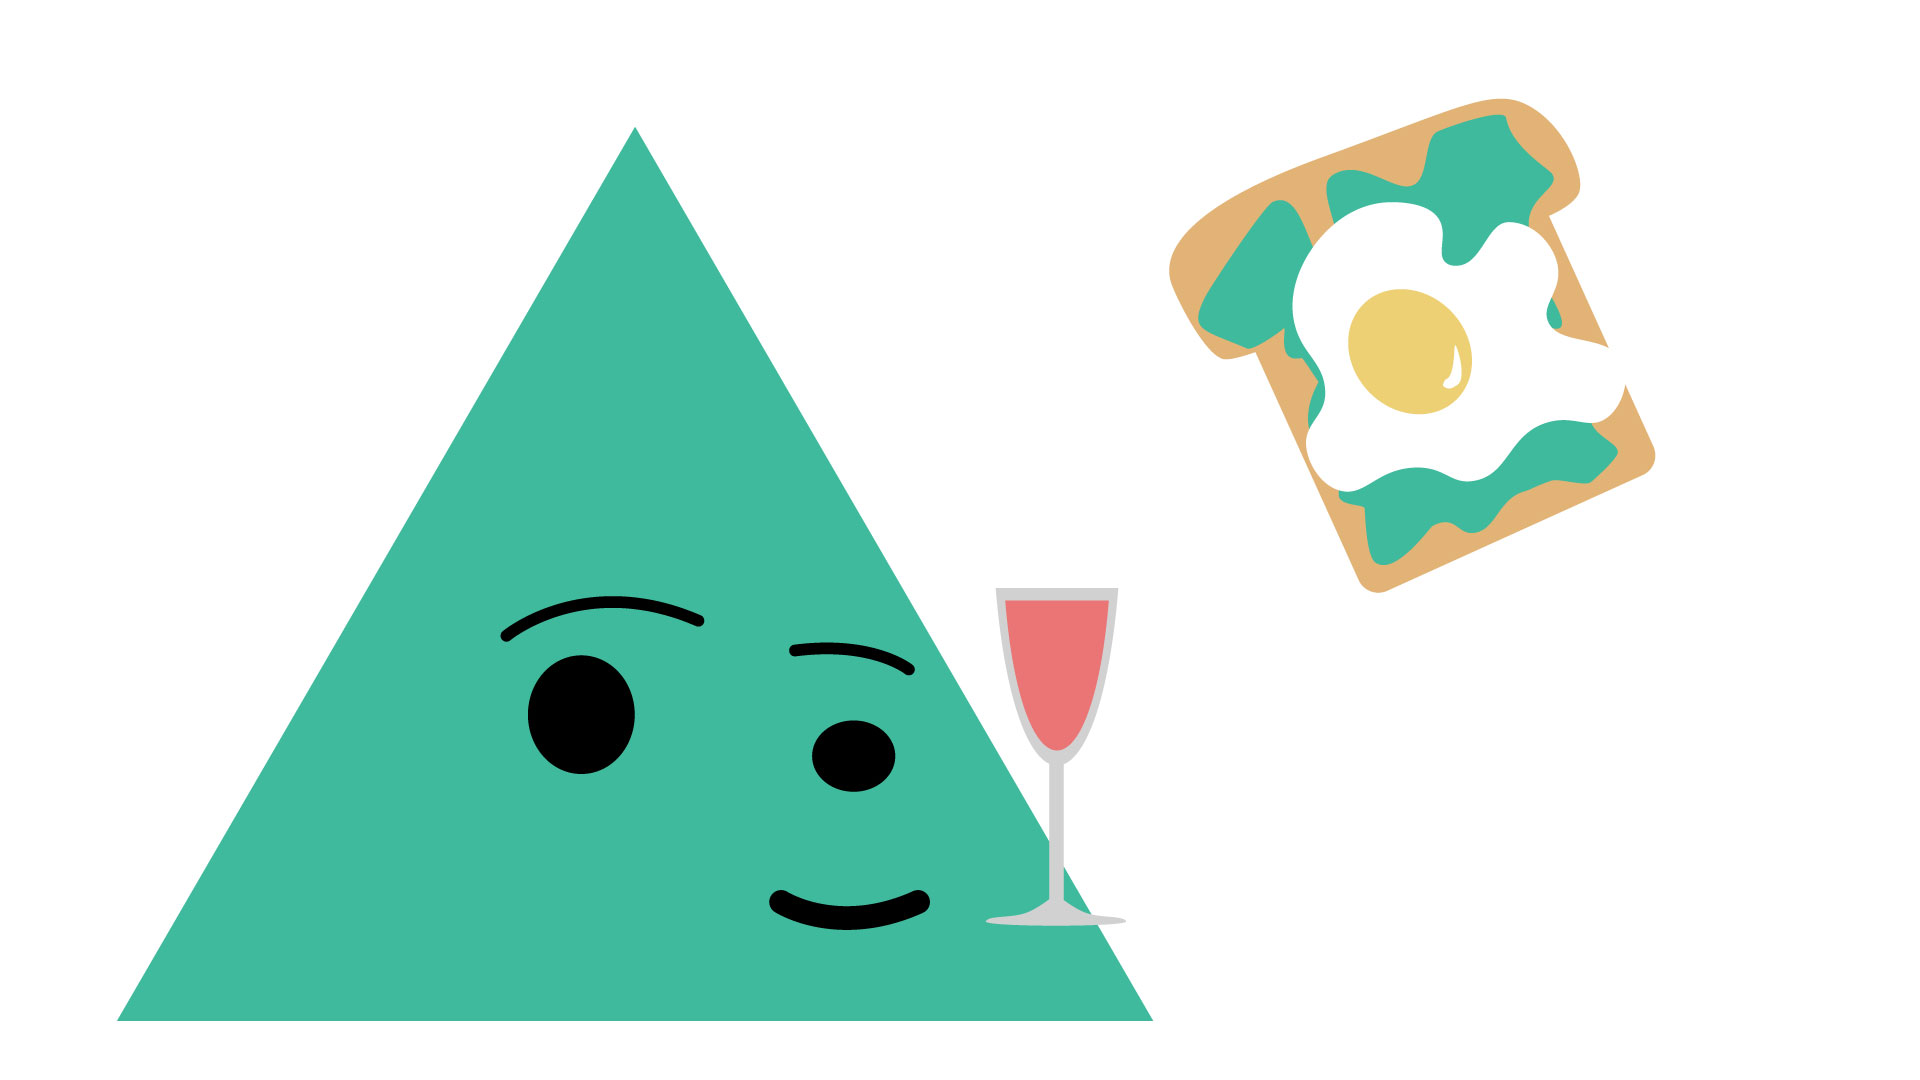 An anthropomorphic triangle holds a glass of mimosa and thinks of egg-on-avocado-toast